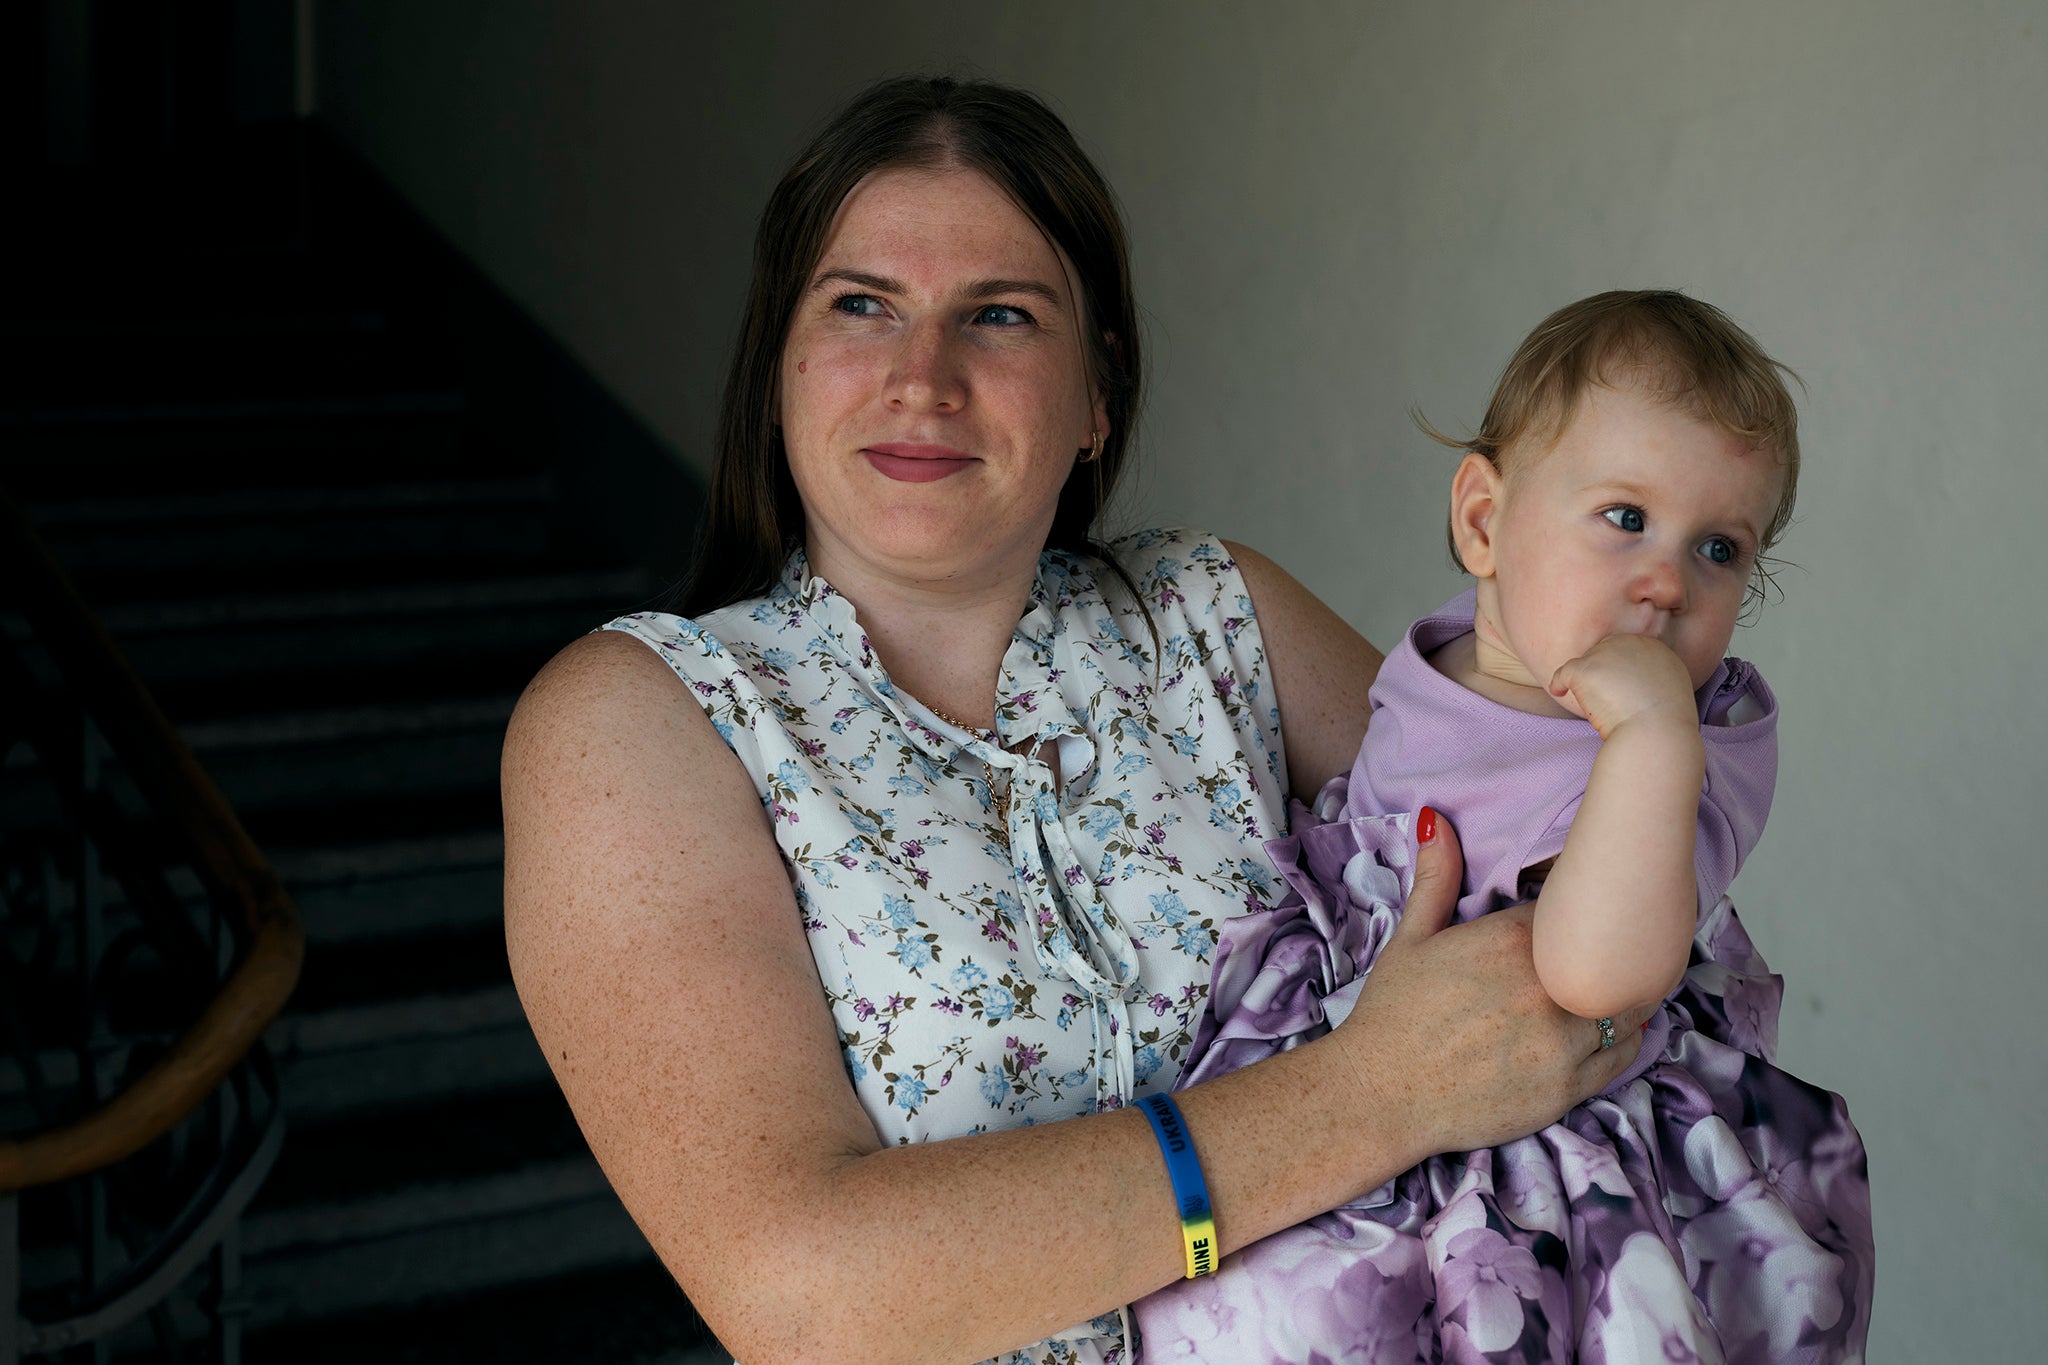 Tatiana, 35, from Odesa, holds her Swiss-born daughter Viktoria, who recently celebrated her first birthday